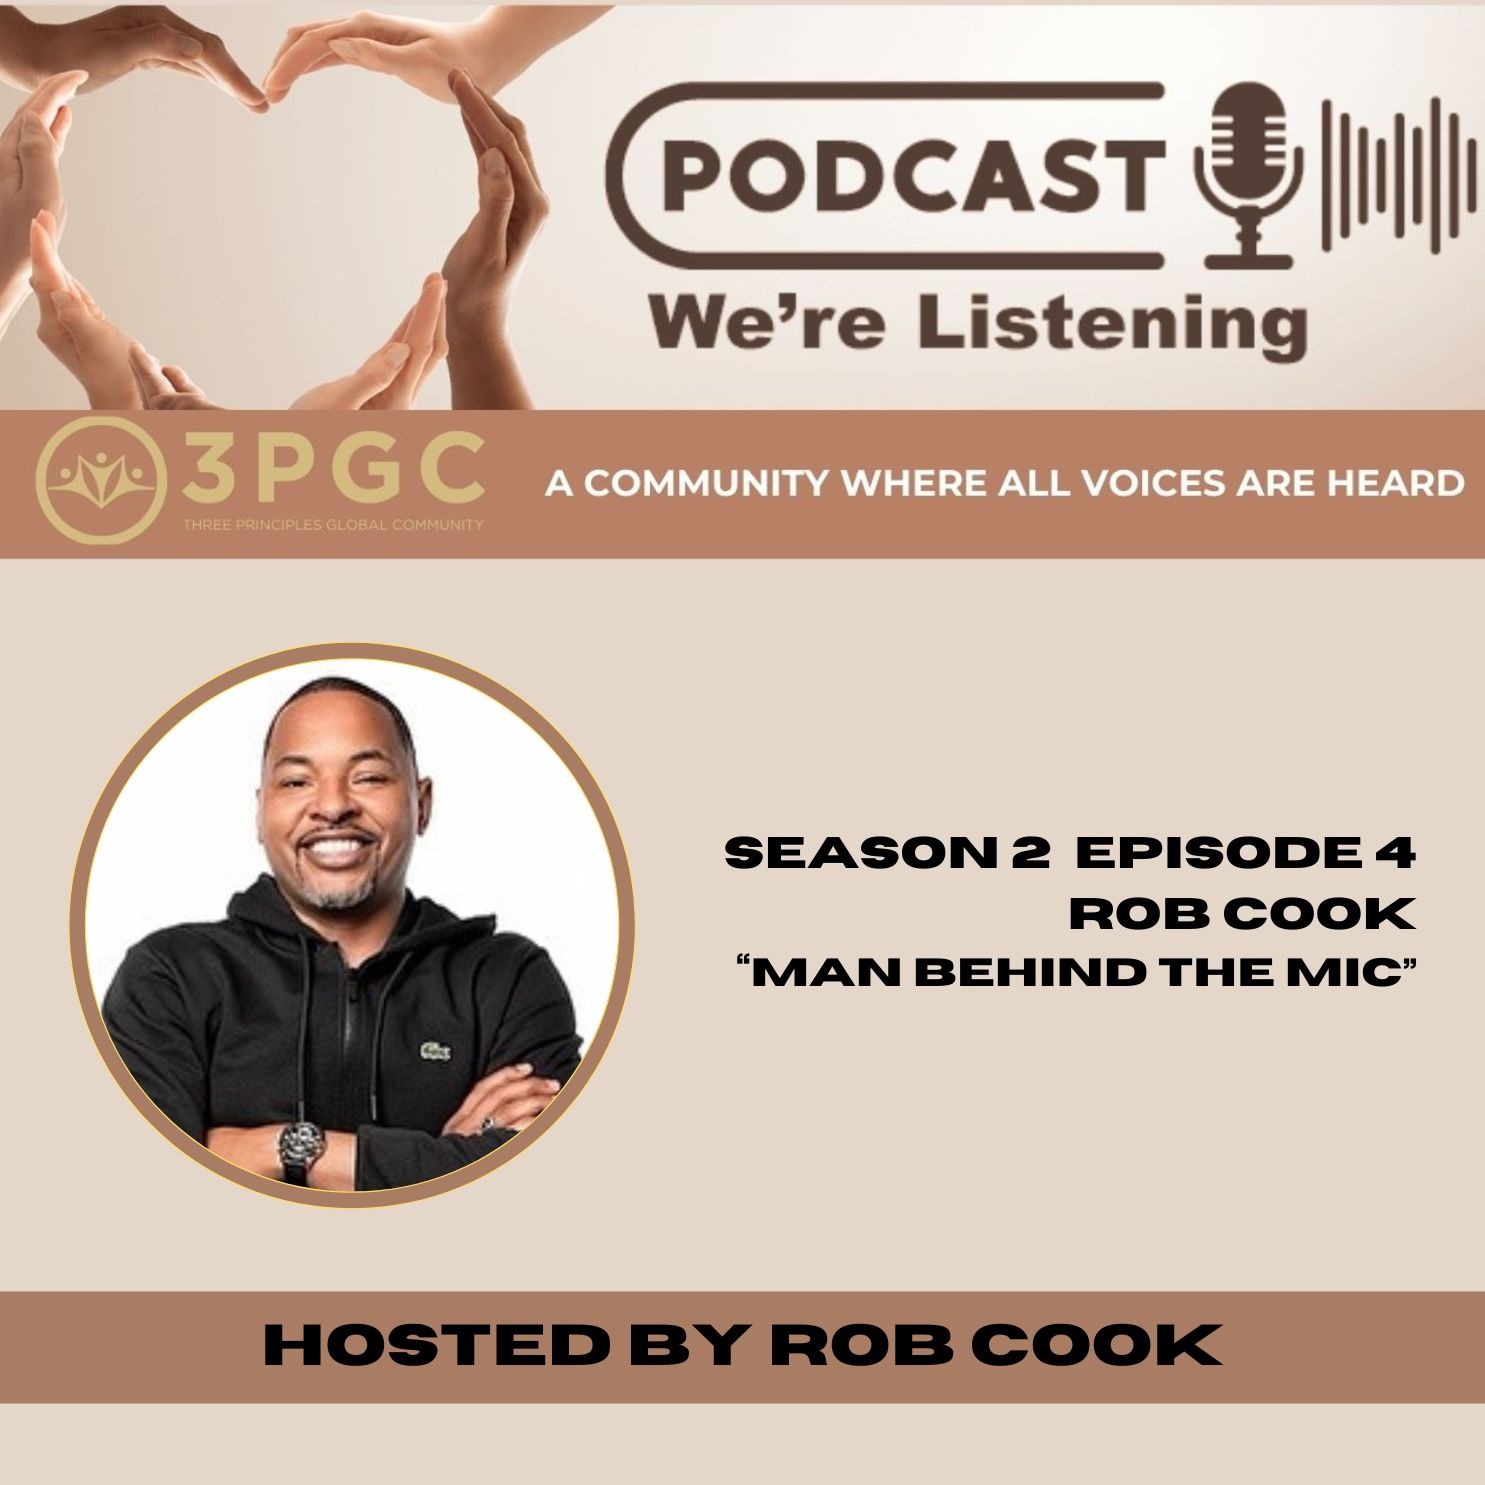 S2 Ep 4. Rob Cook "Man Behind the Mic"